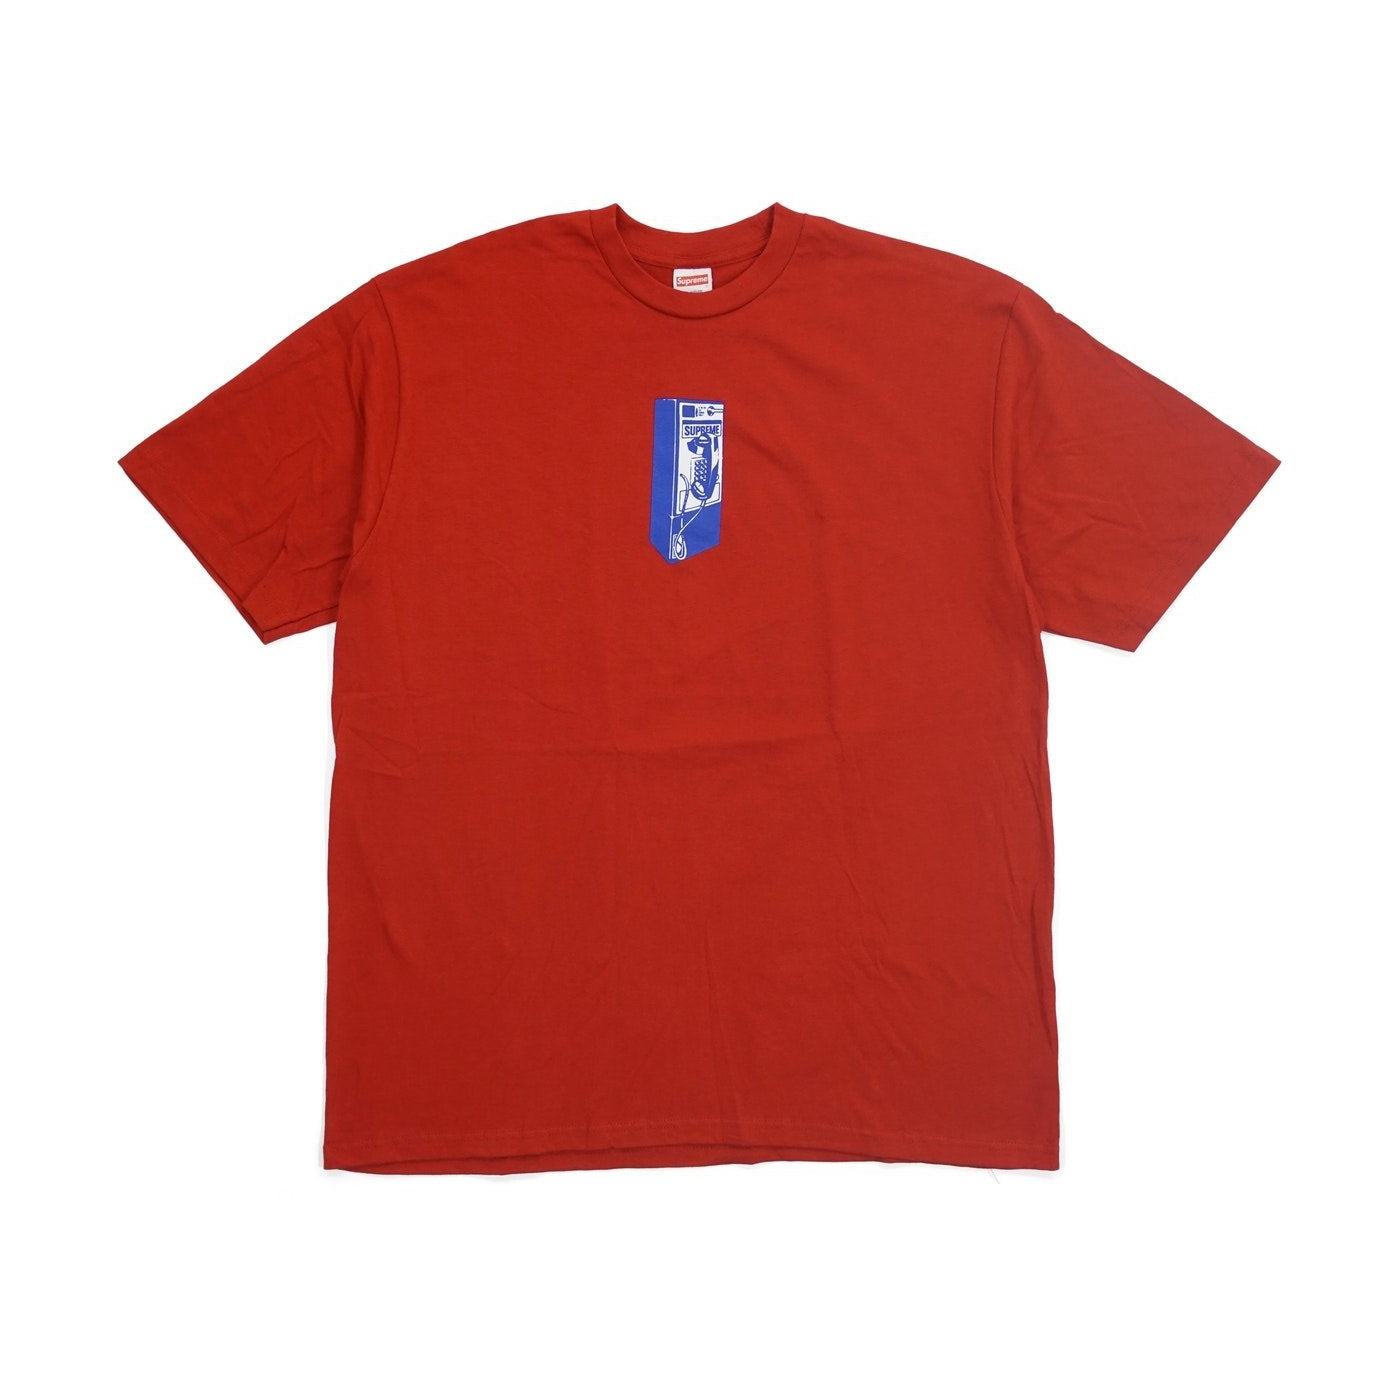 Supreme Tee "Payphone" Red - Centrall Online